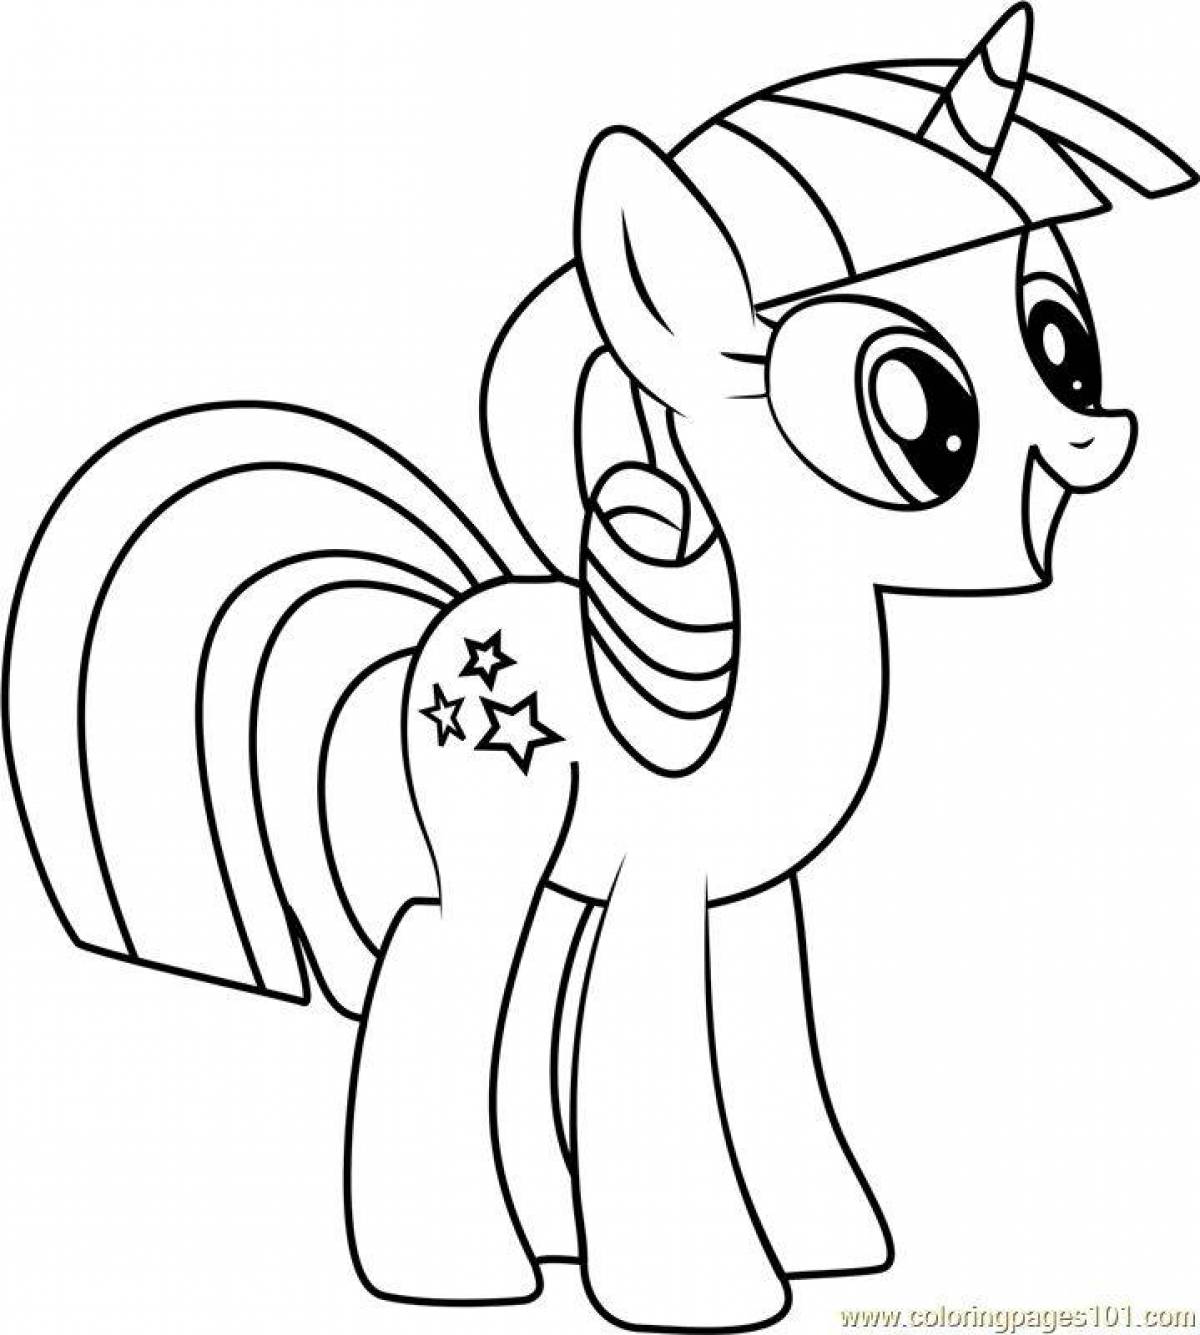 Great pony sparkle coloring book